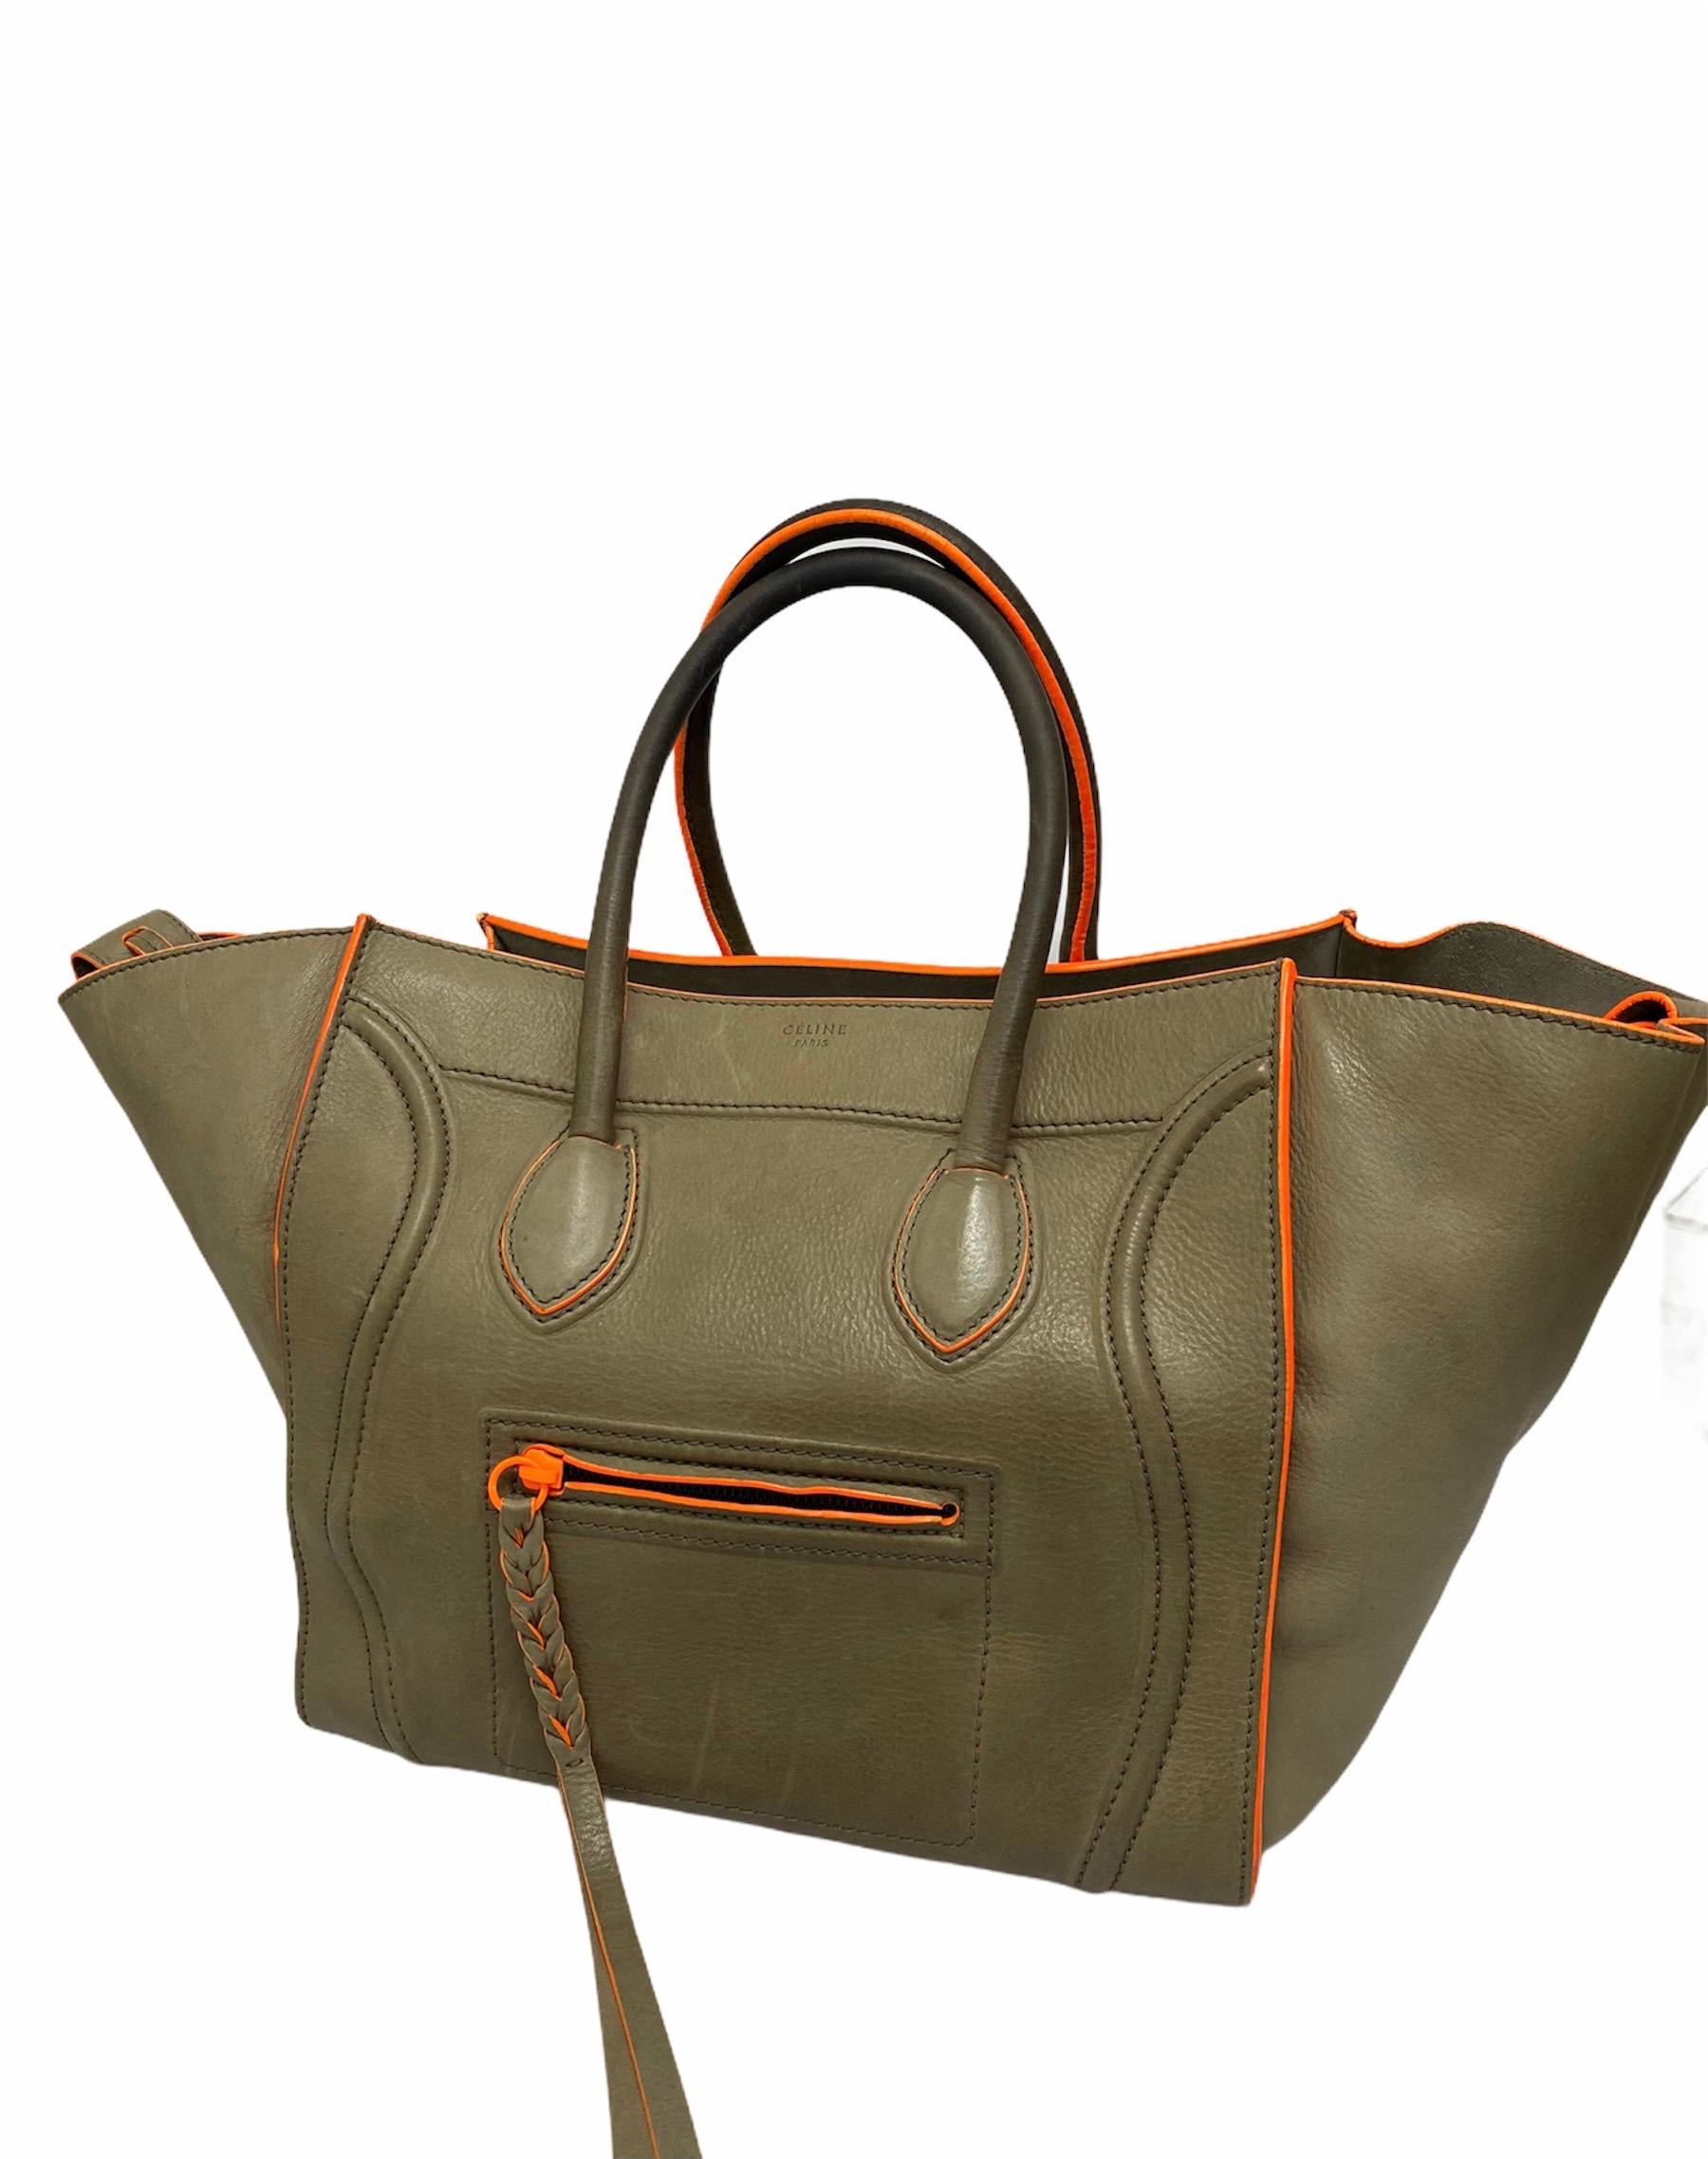 Cèline Luggage Phantom model bag in gray leather with fluorescent orange inserts.
Equipped with double leather handle.
Closure with stringhie, entirely very large.
The product has a speck inside and some signs of wear.

Dimensions: 25 × 29 × 27 cm
